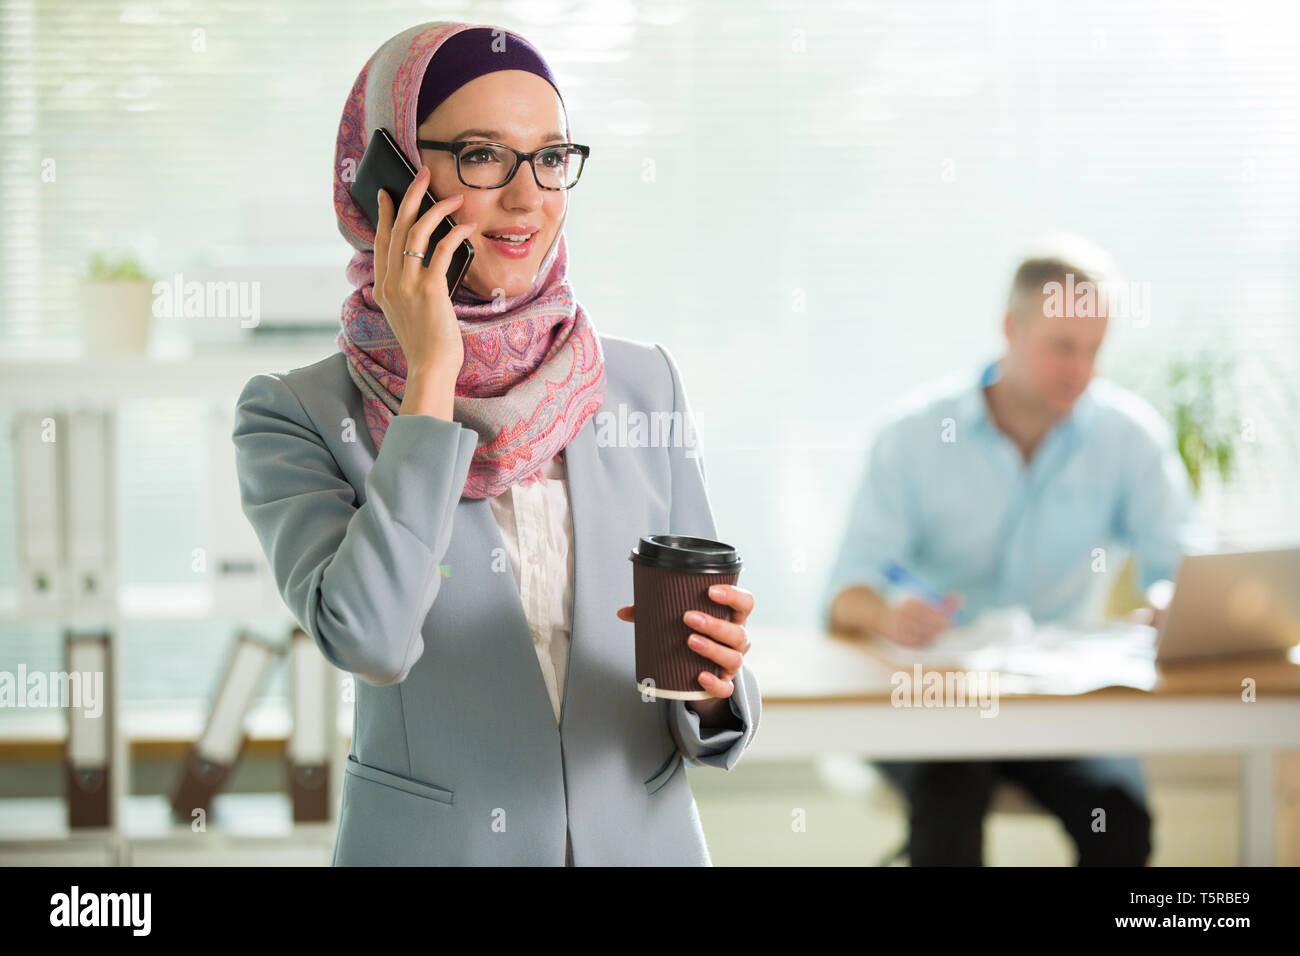 Beautiful woman in hijab and eyeglasses talking on phone, smiling, holding cup of coffee. Portrait of confident muslim businesswoman. Modern office Stock Photo